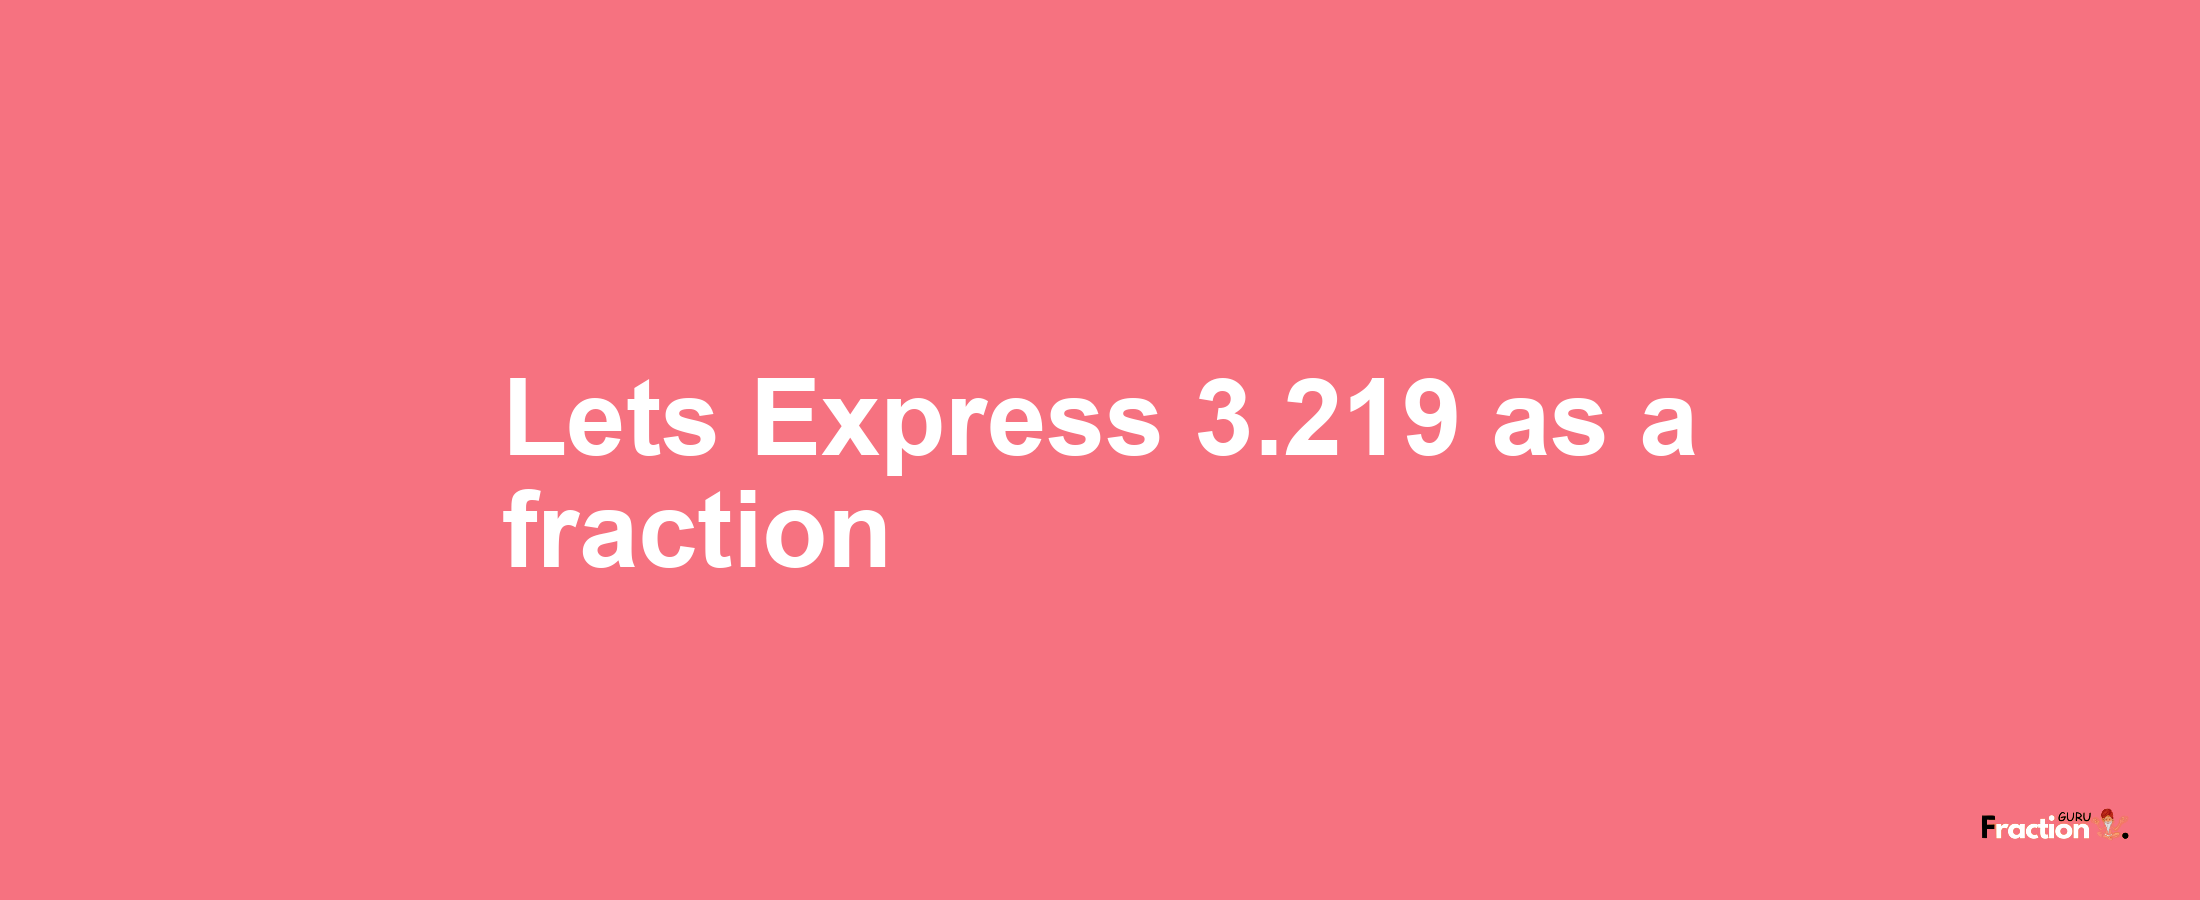 Lets Express 3.219 as afraction